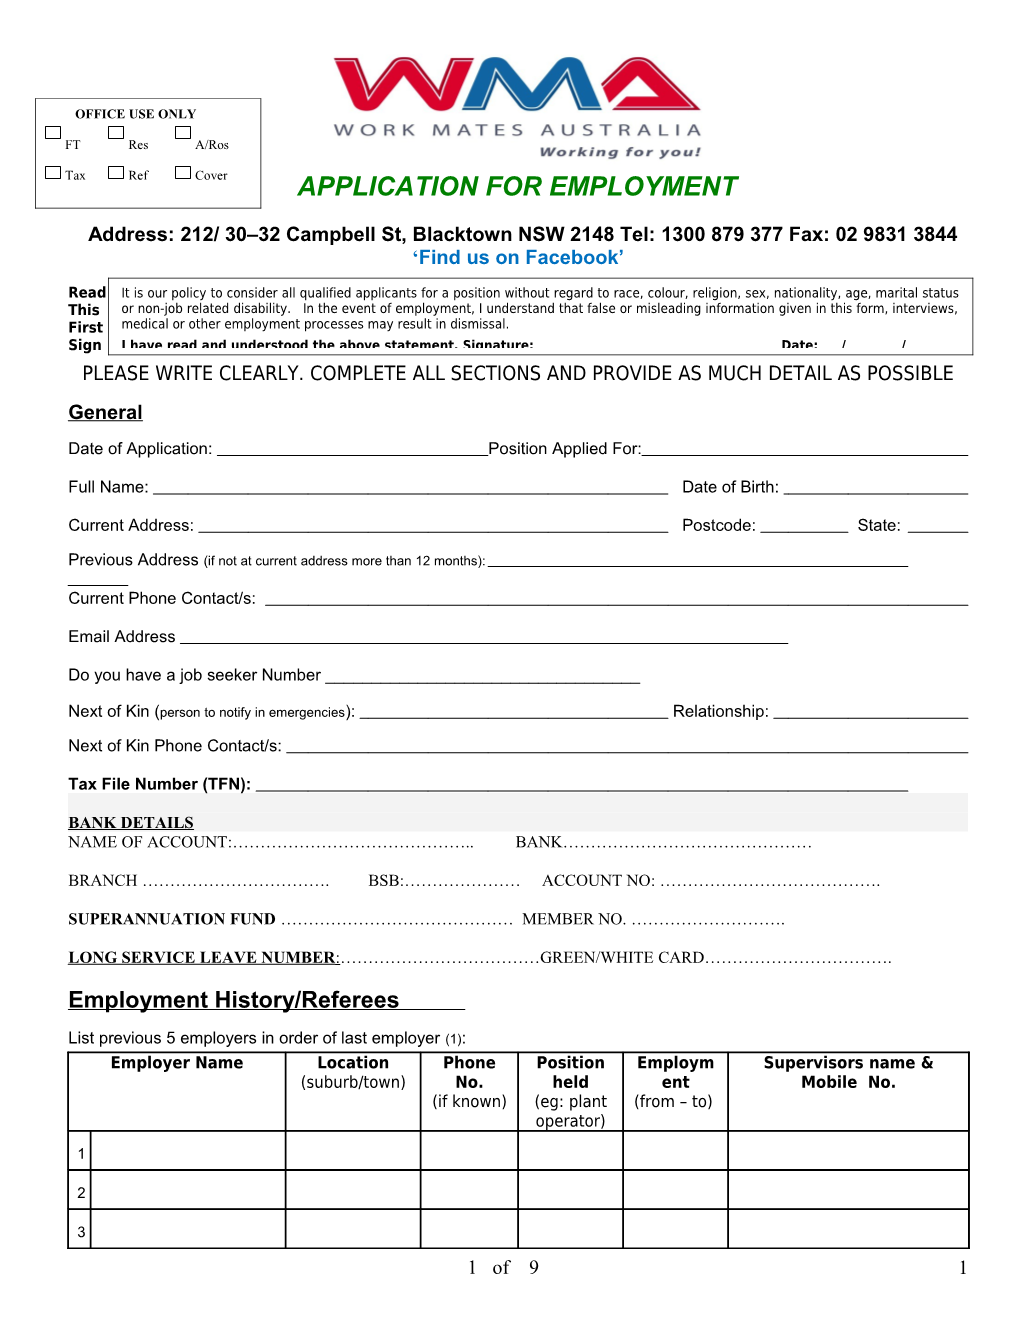 Application for Employment s43